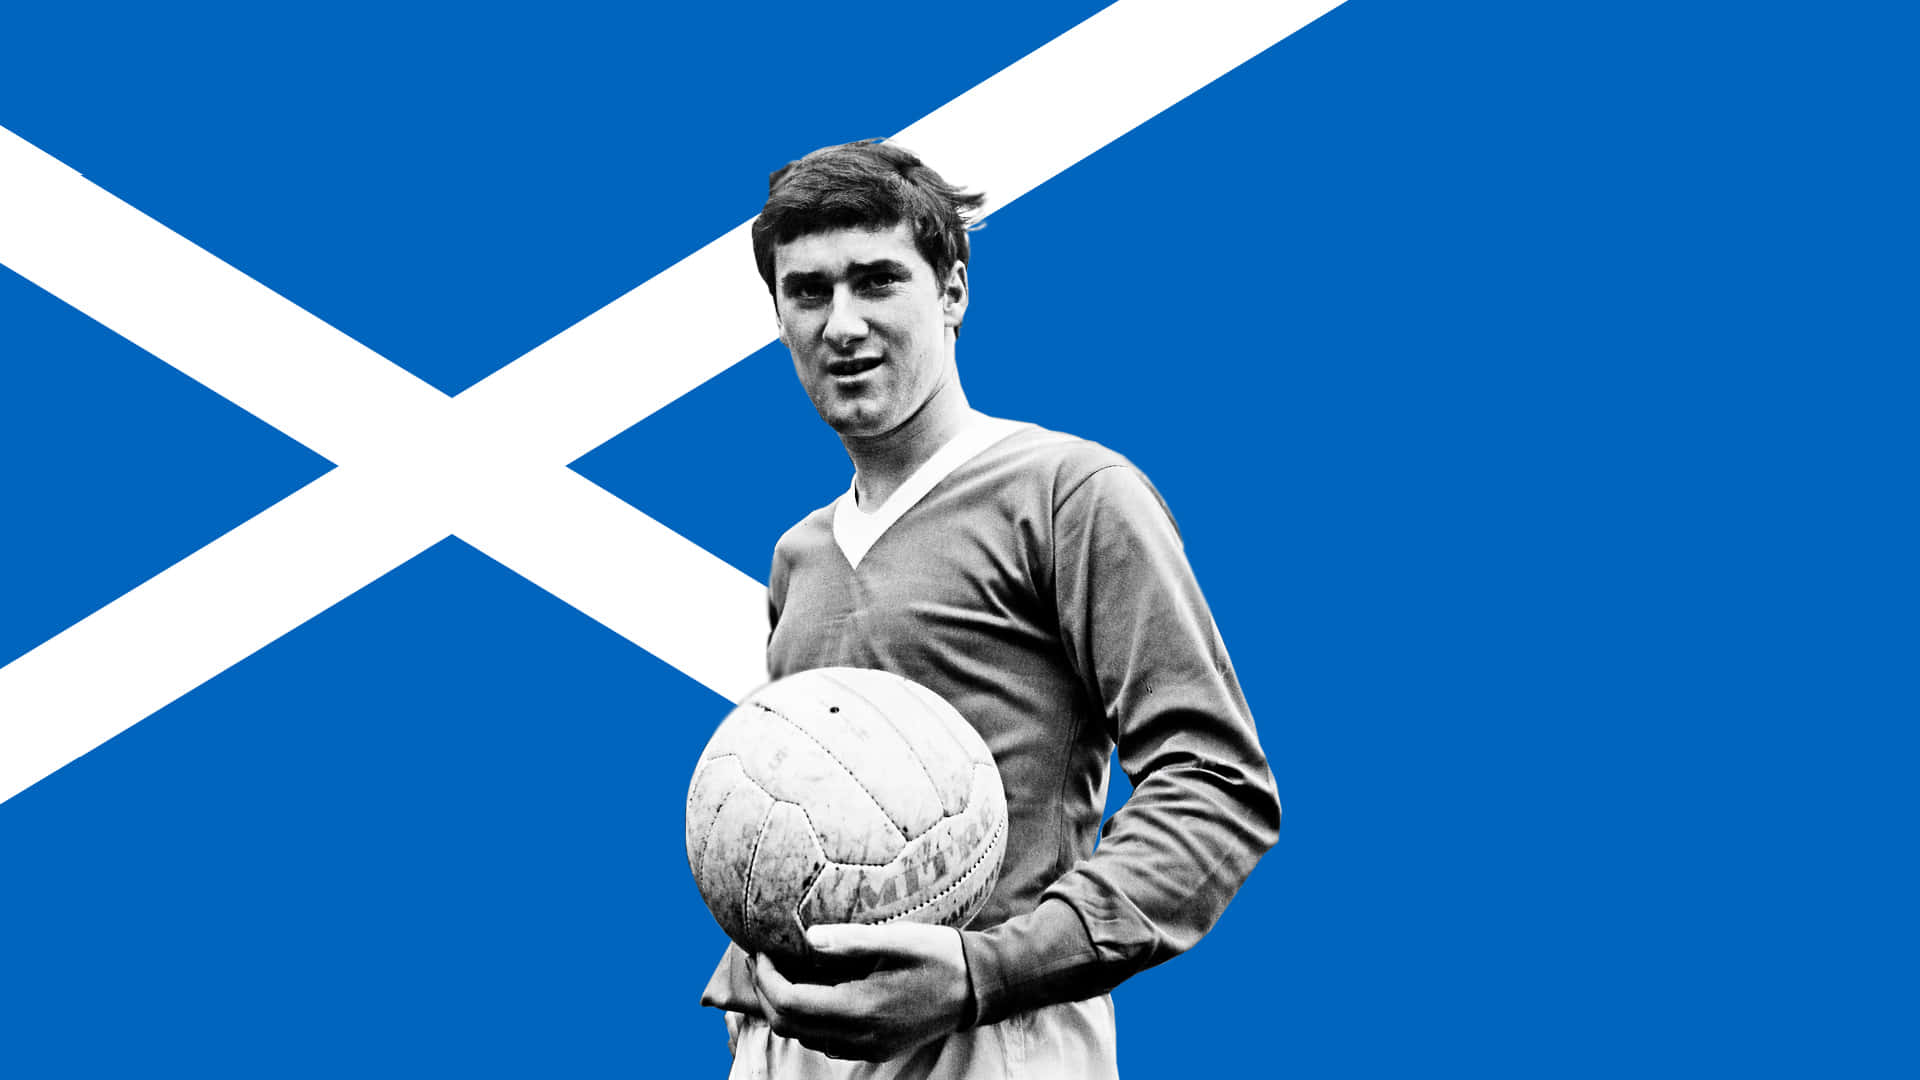 19-facts-about-jim-baxter